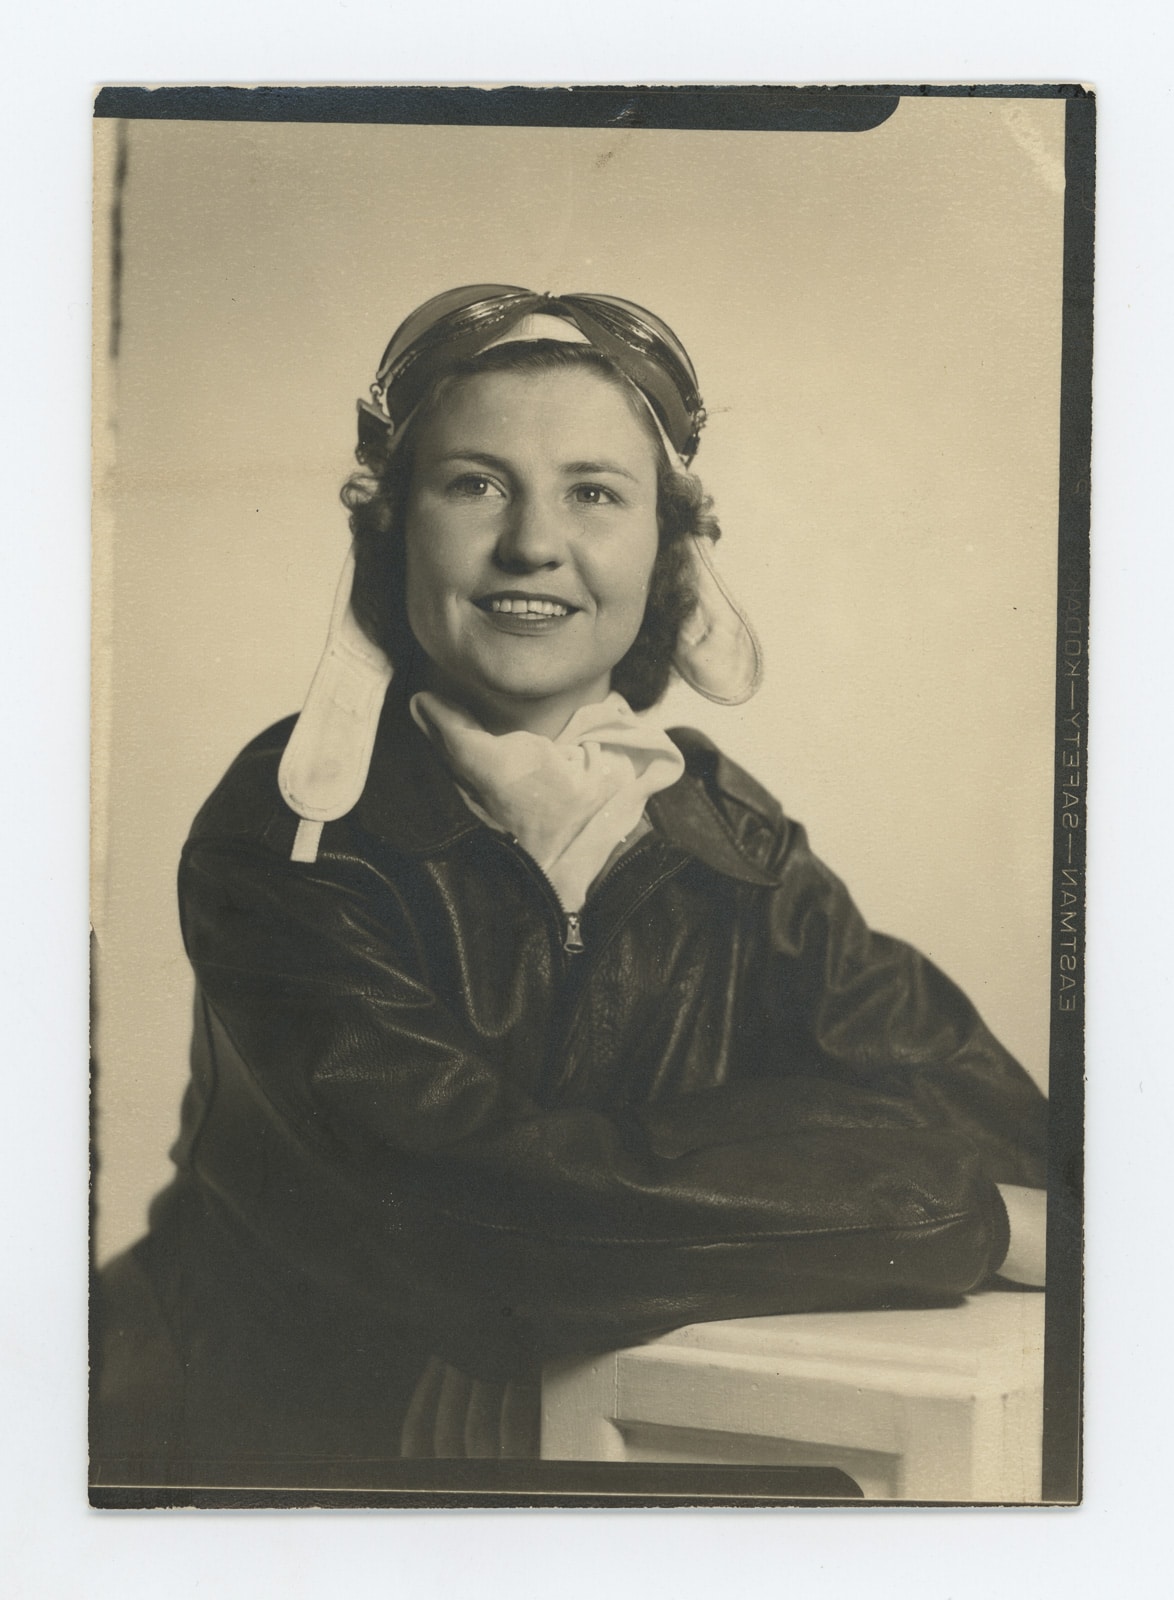 Lunch & Learn - Highlights from the Archives: Women Airforce Service Pilots